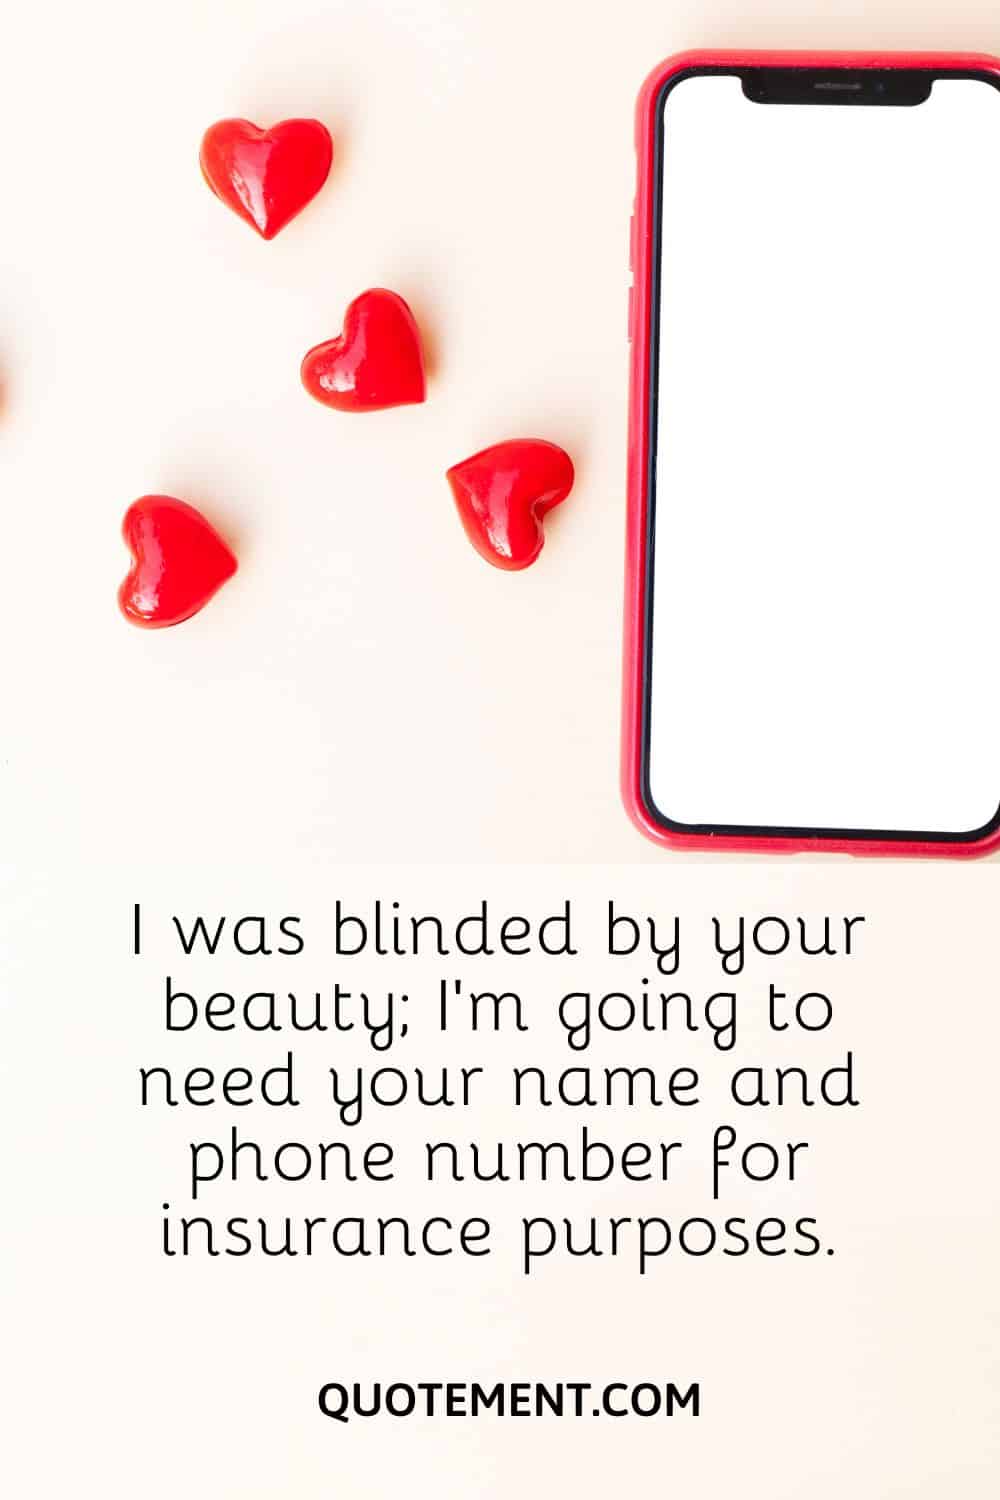 I was blinded by your beauty;